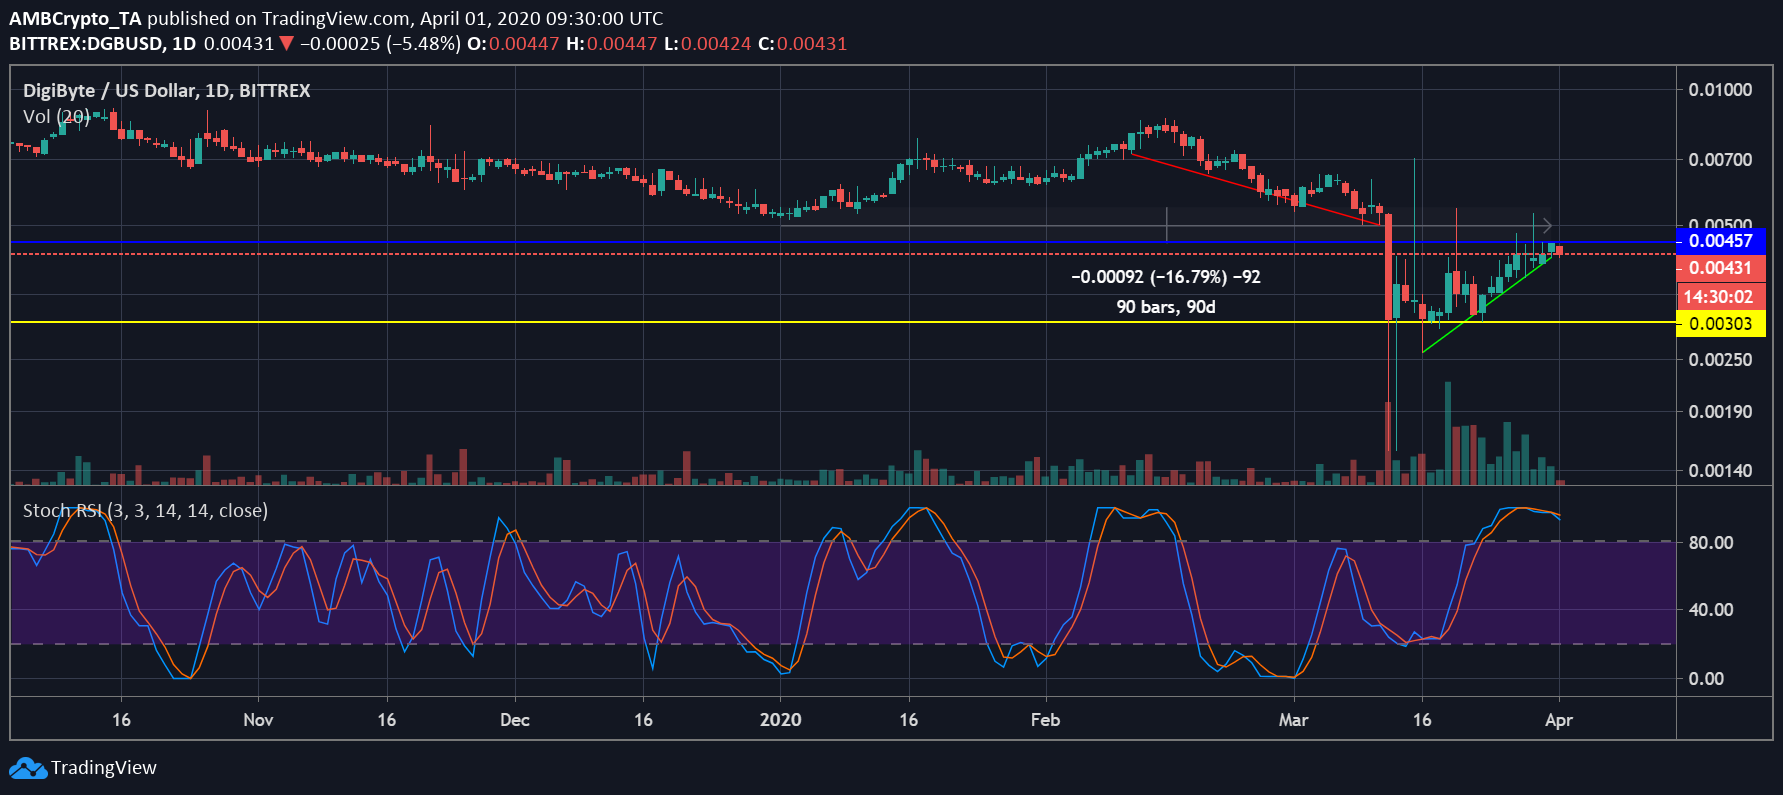 Source: DGB/USD on Trading View